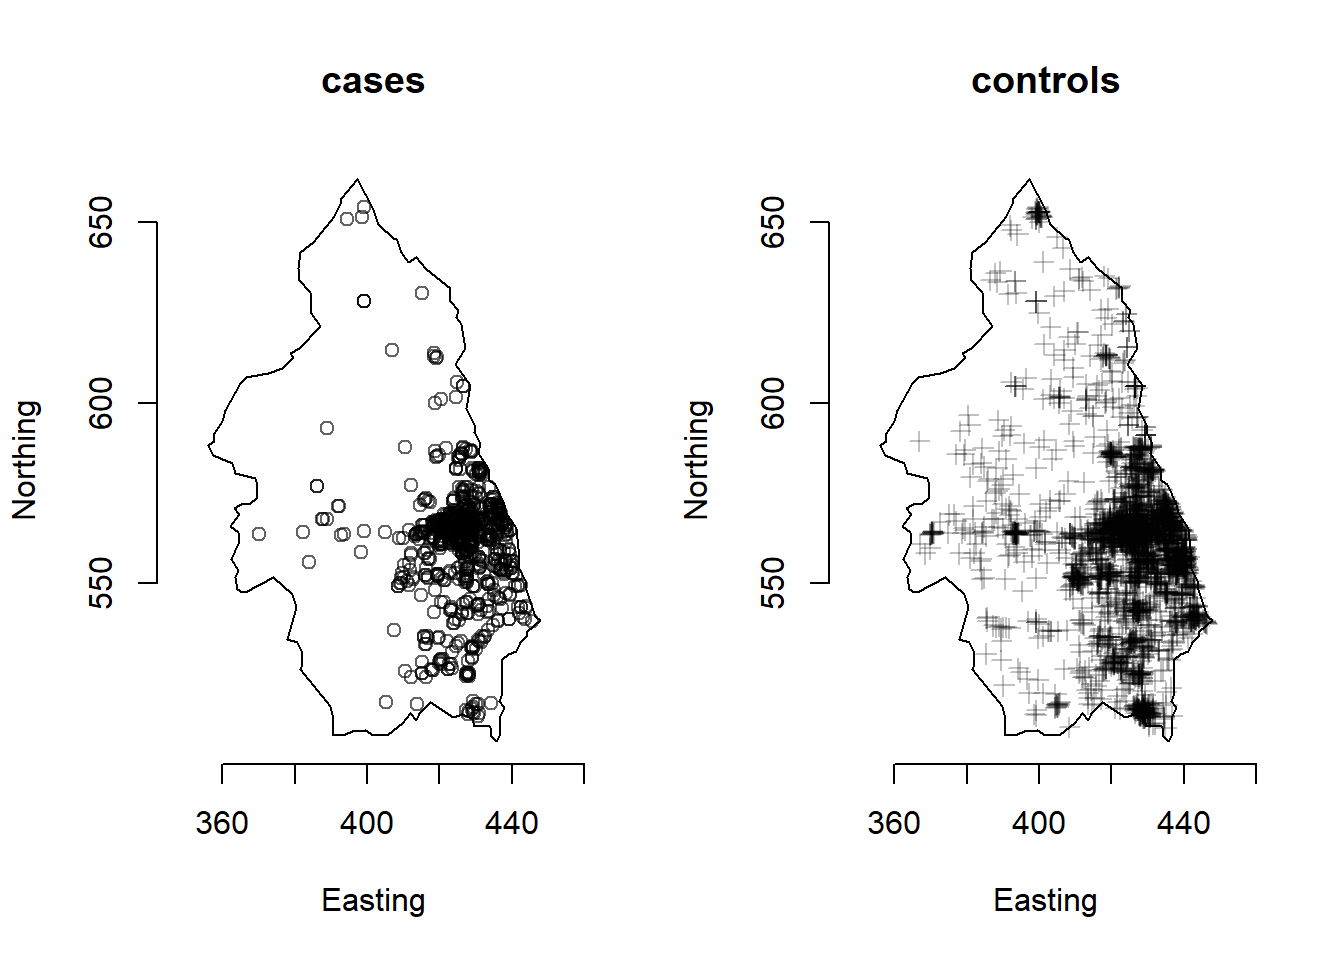 Cases of primary biliary cirrhosis and controls representing at-risk population (top) and intensity ratio (bottom) in north-eastern England between 1987 and 1994.